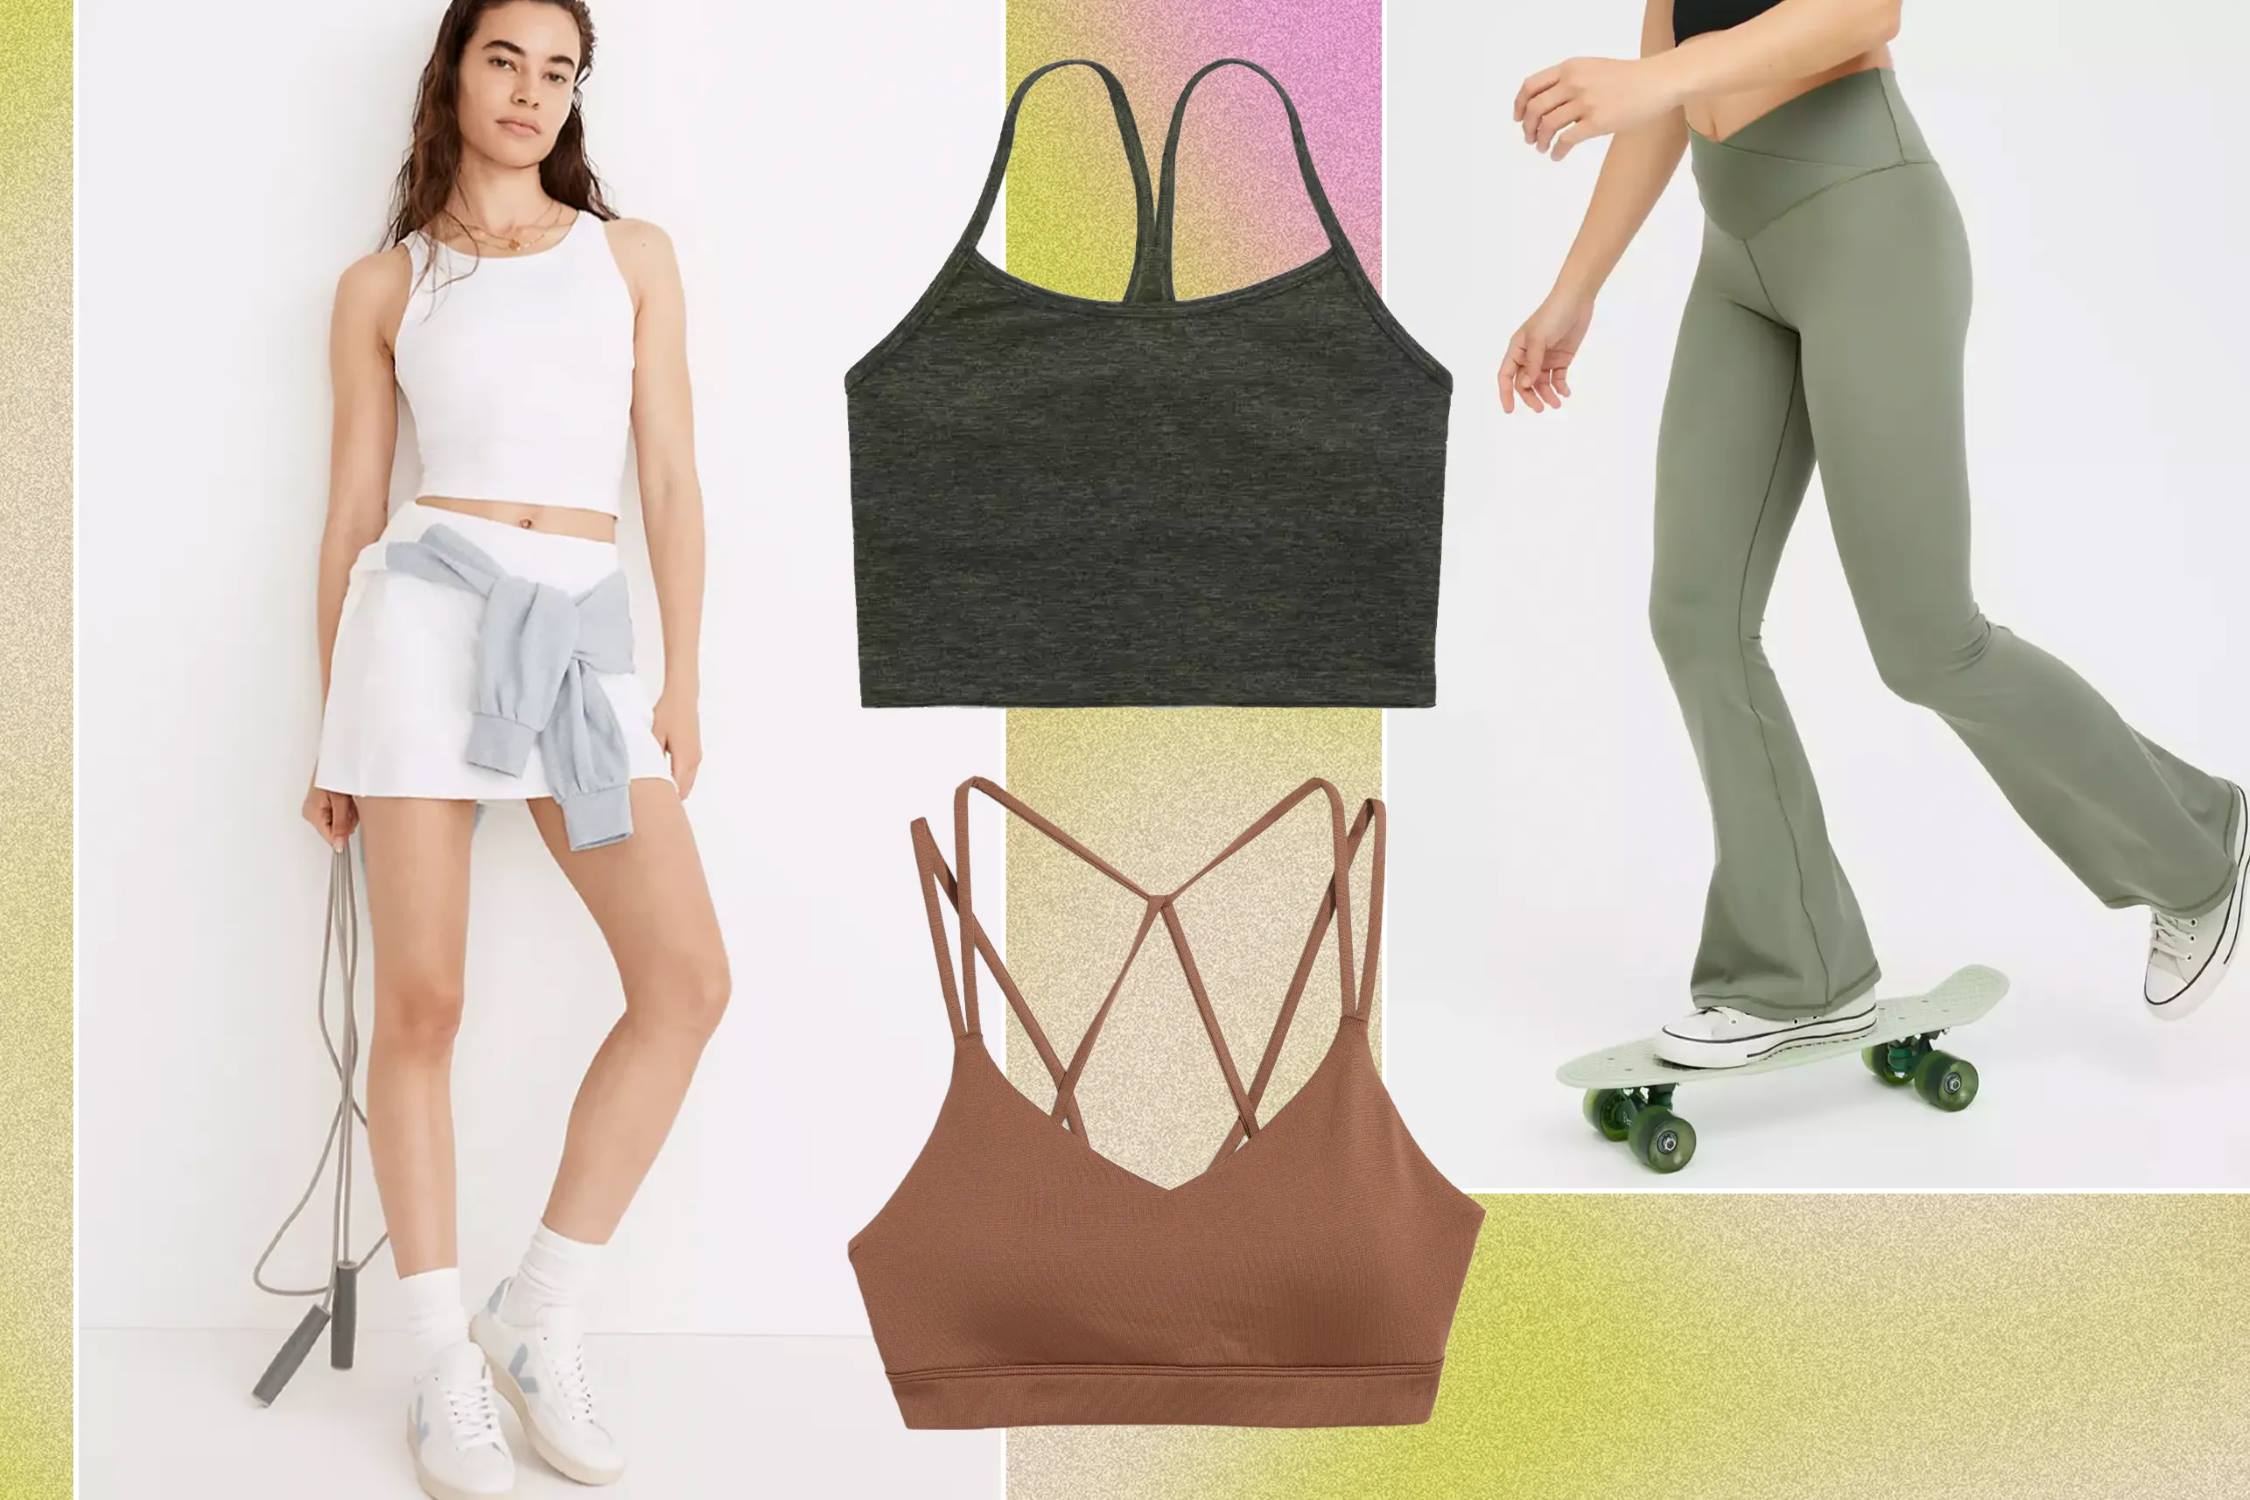 What Are The Best Workout Clothes